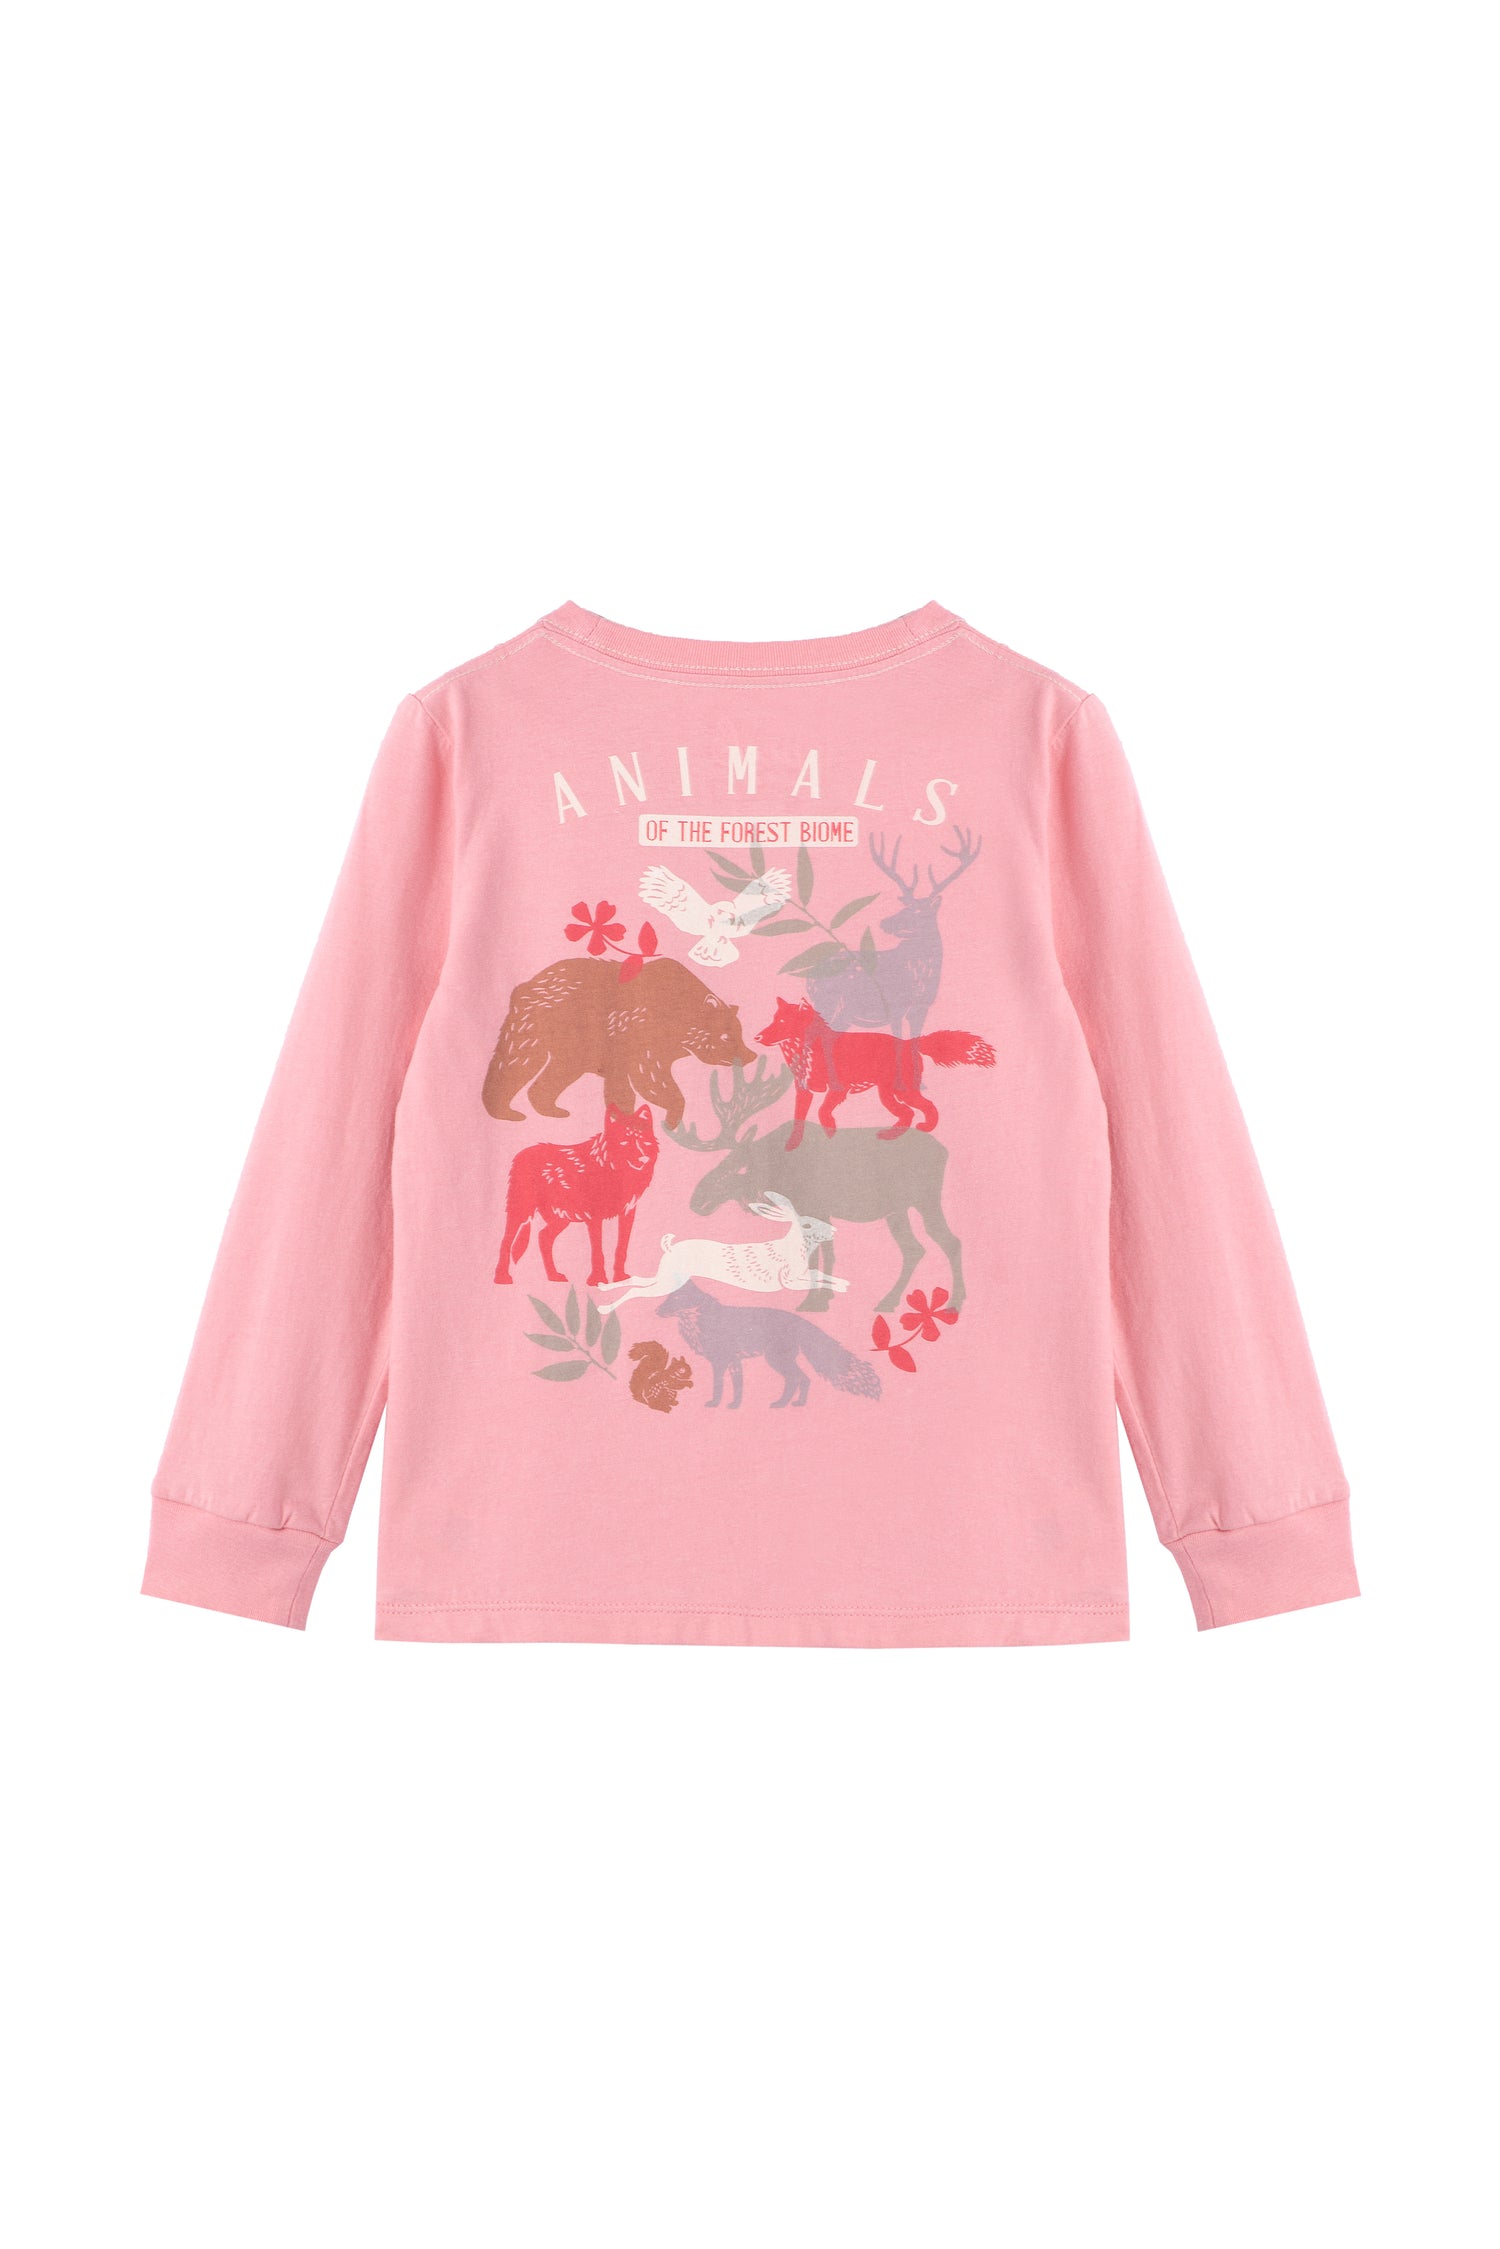 Back of pink long-sleeve t-shirt with various illustrated animals and 'animals of the forest biome' 